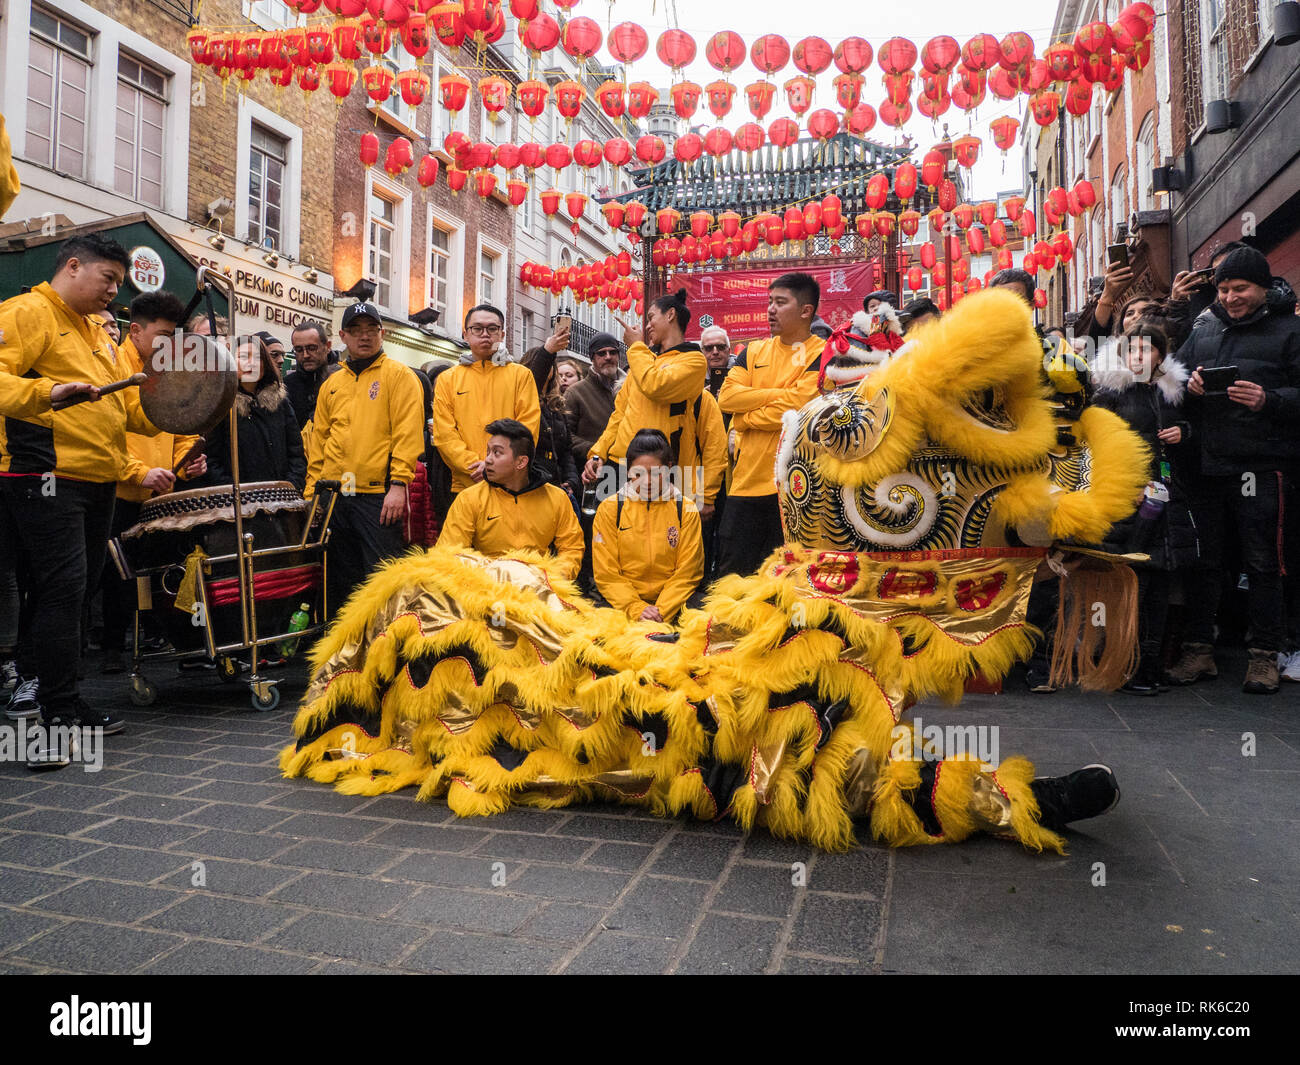 London, UK. 09th Feb, 2019. 'Dragon' performs in a street as part of the Chinese New Year celebrations in Chinatown, London, UK. Credit: escapetheofficejob/Alamy Live News Stock Photo